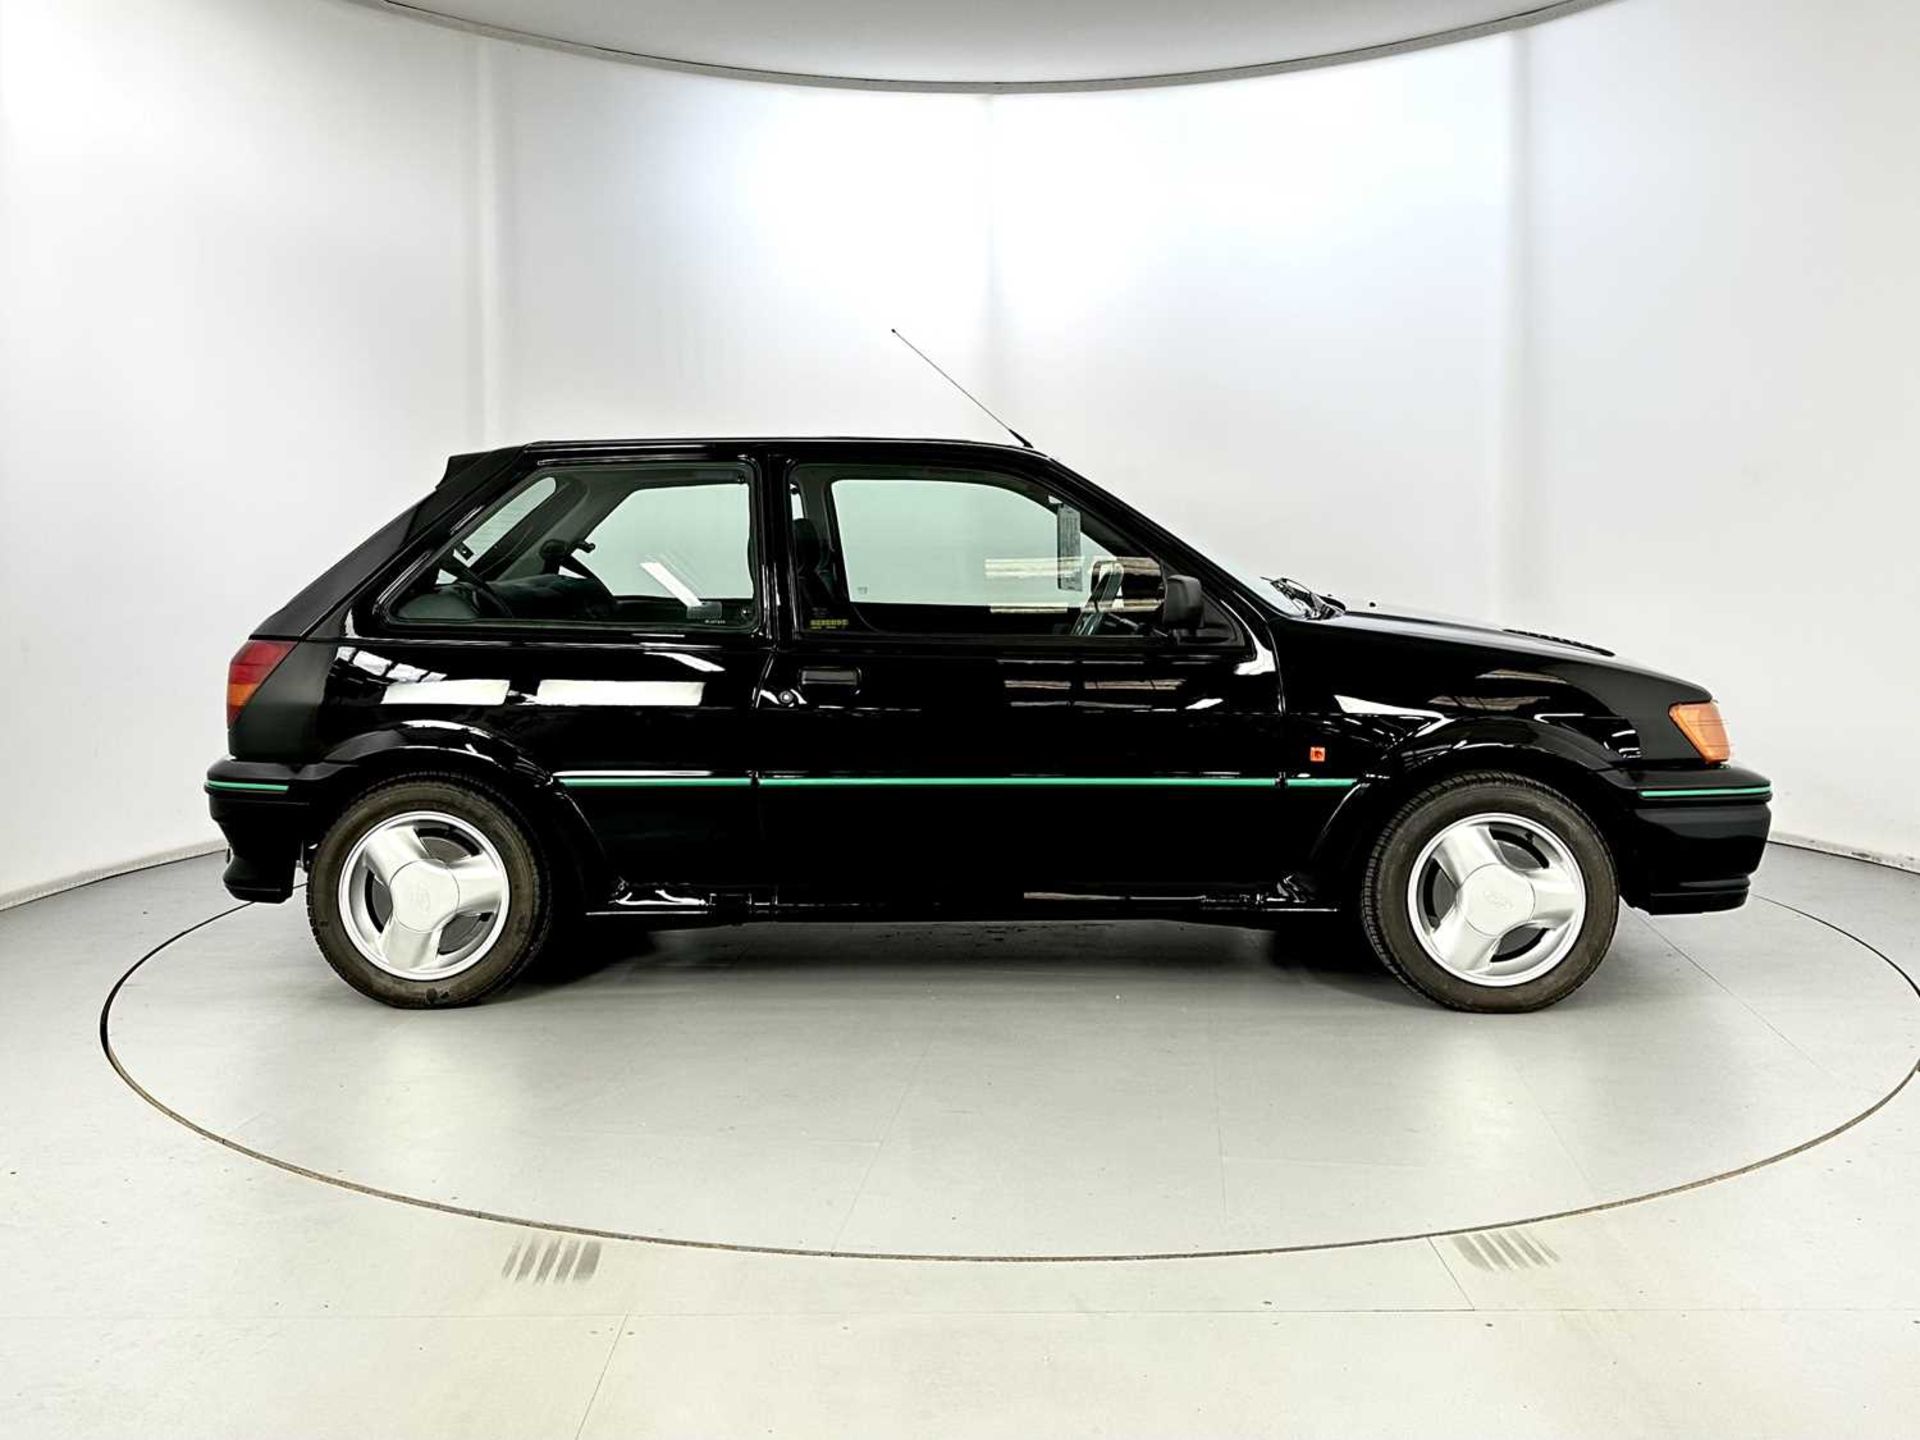 1991 Ford Fiesta RS Turbo Spectacular Original Condition  - Image 11 of 40